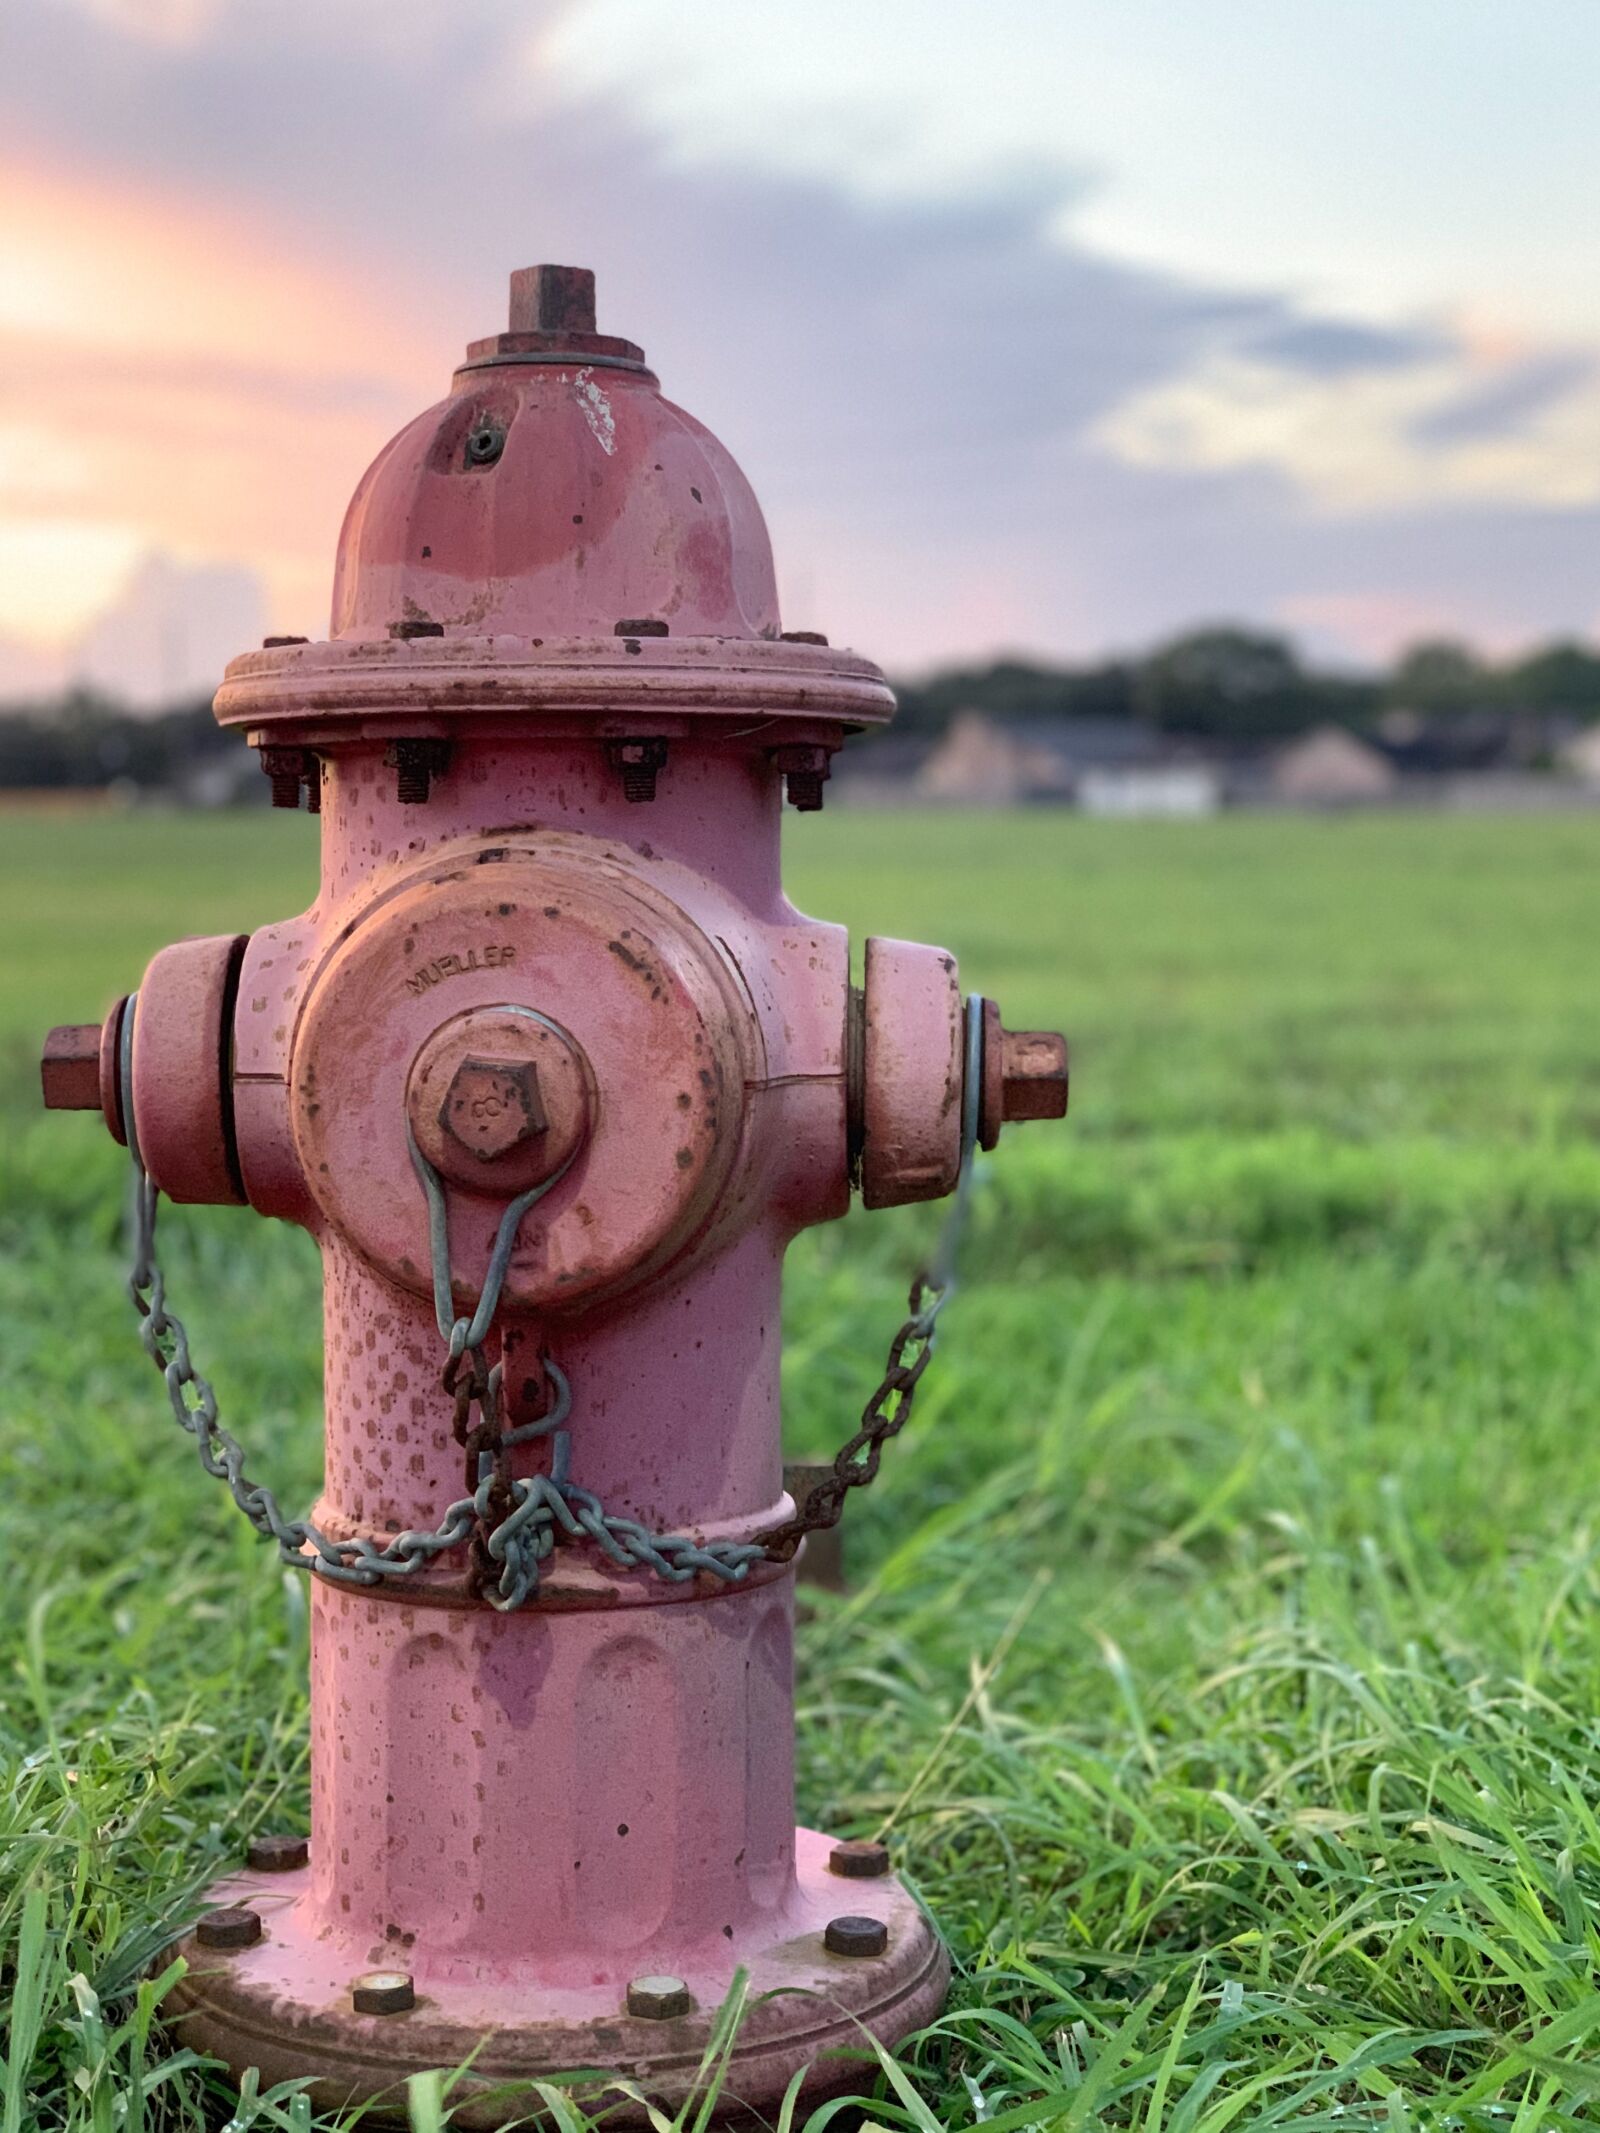 Apple iPhone XS Max + iPhone XS Max back dual camera 6mm f/2.4 sample photo. Hydrant, fire, sunset photography